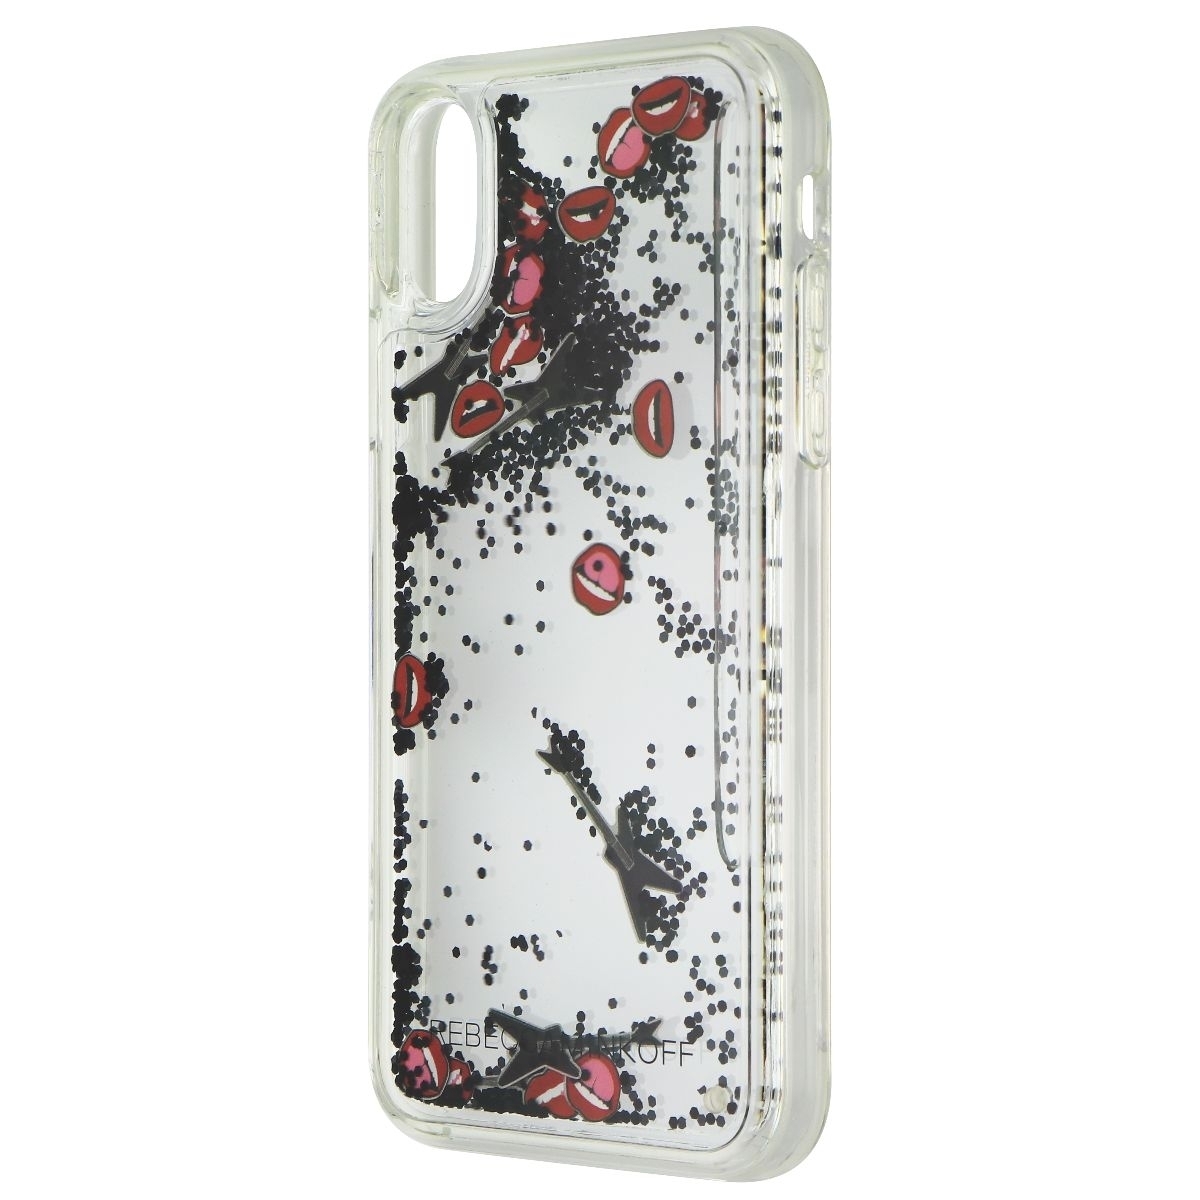 Rebecca Minkoff See Though Me Case For Apple IPhone Xs/X - Clear/Rockstar (Refurbished)